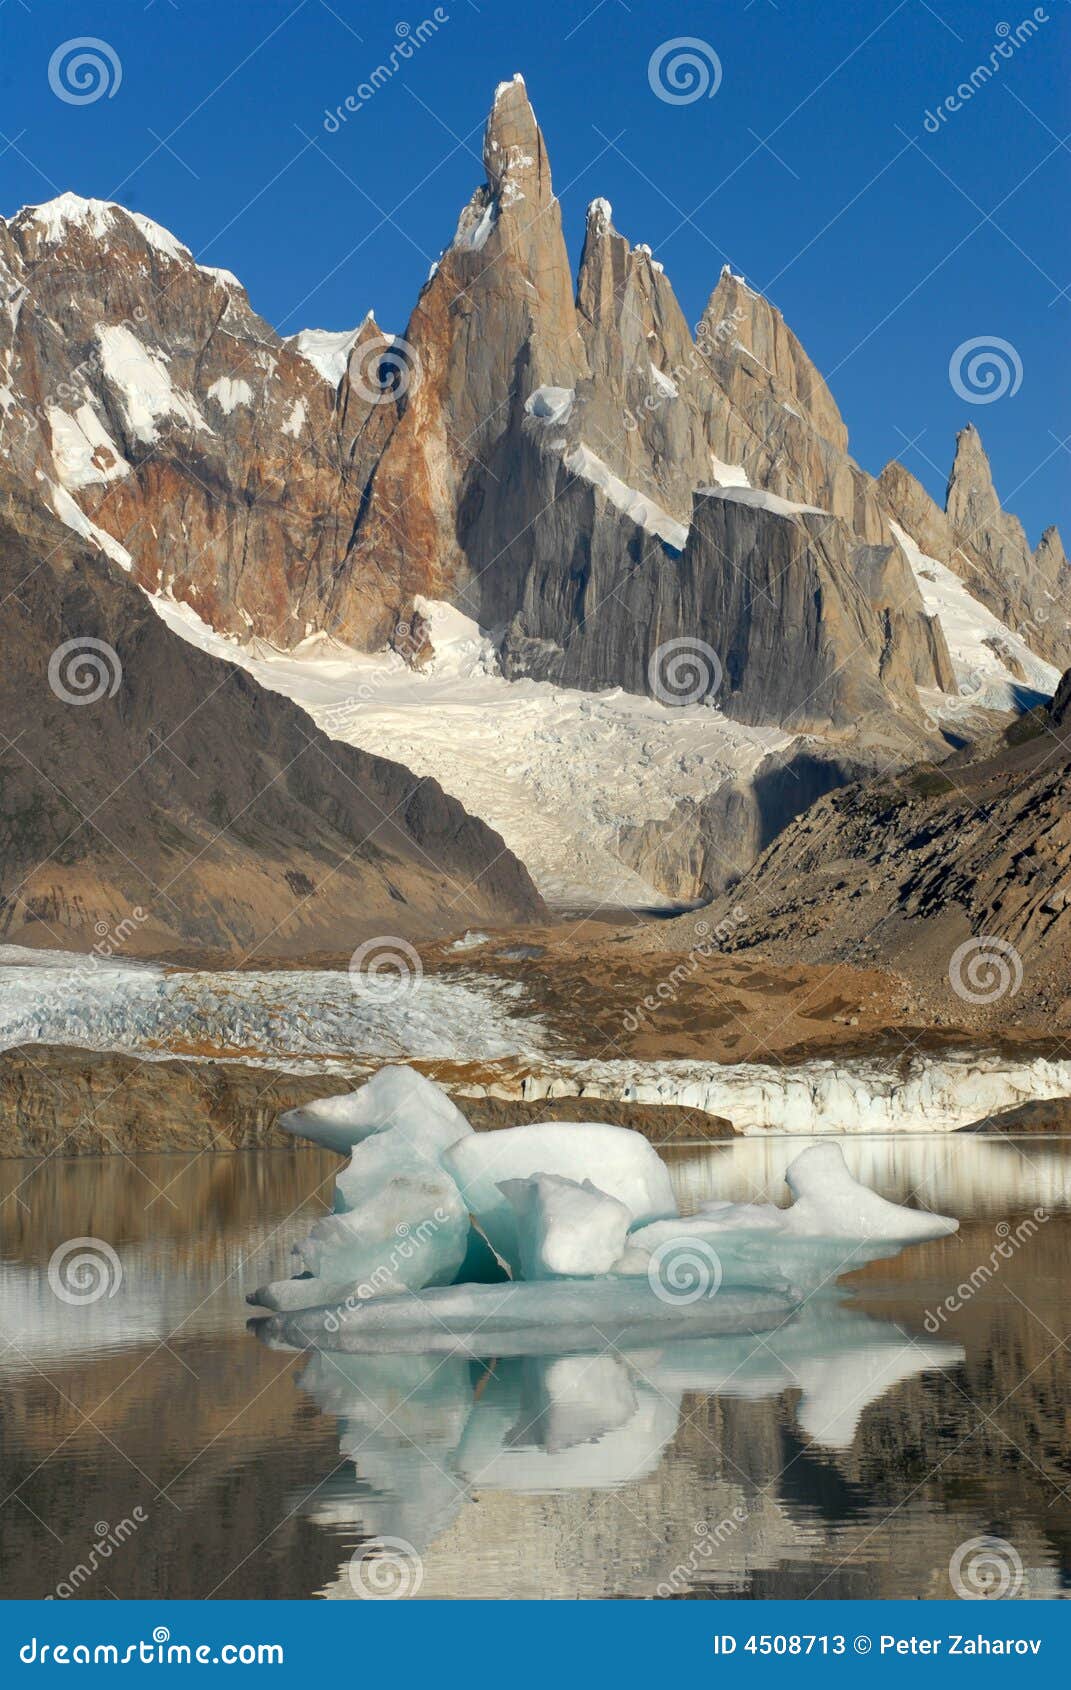 mount cerro torre from lake torre